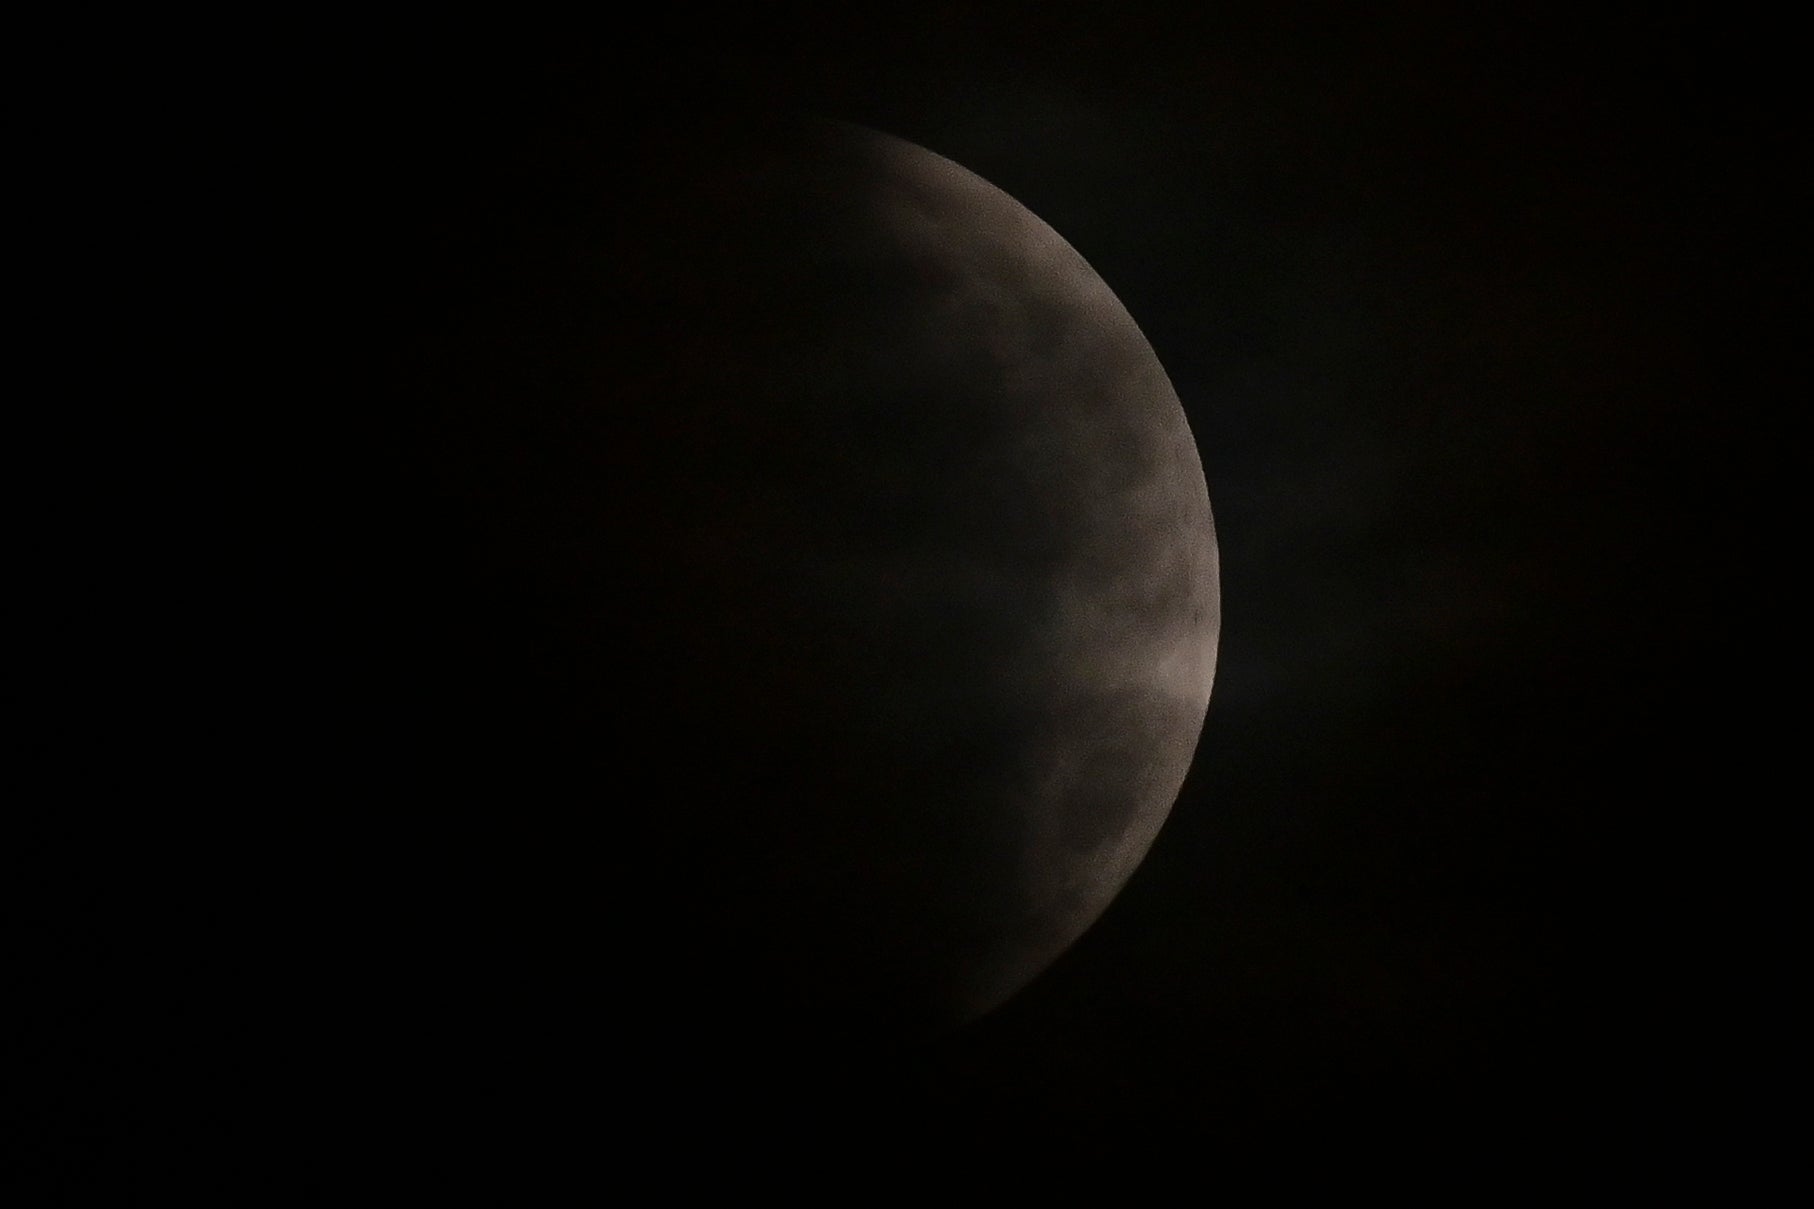 The full moon is seen during the partial eclipse in Mexico City on May 26, 2021. (Photo: PEDRO PARDO/AFP, Getty Images)